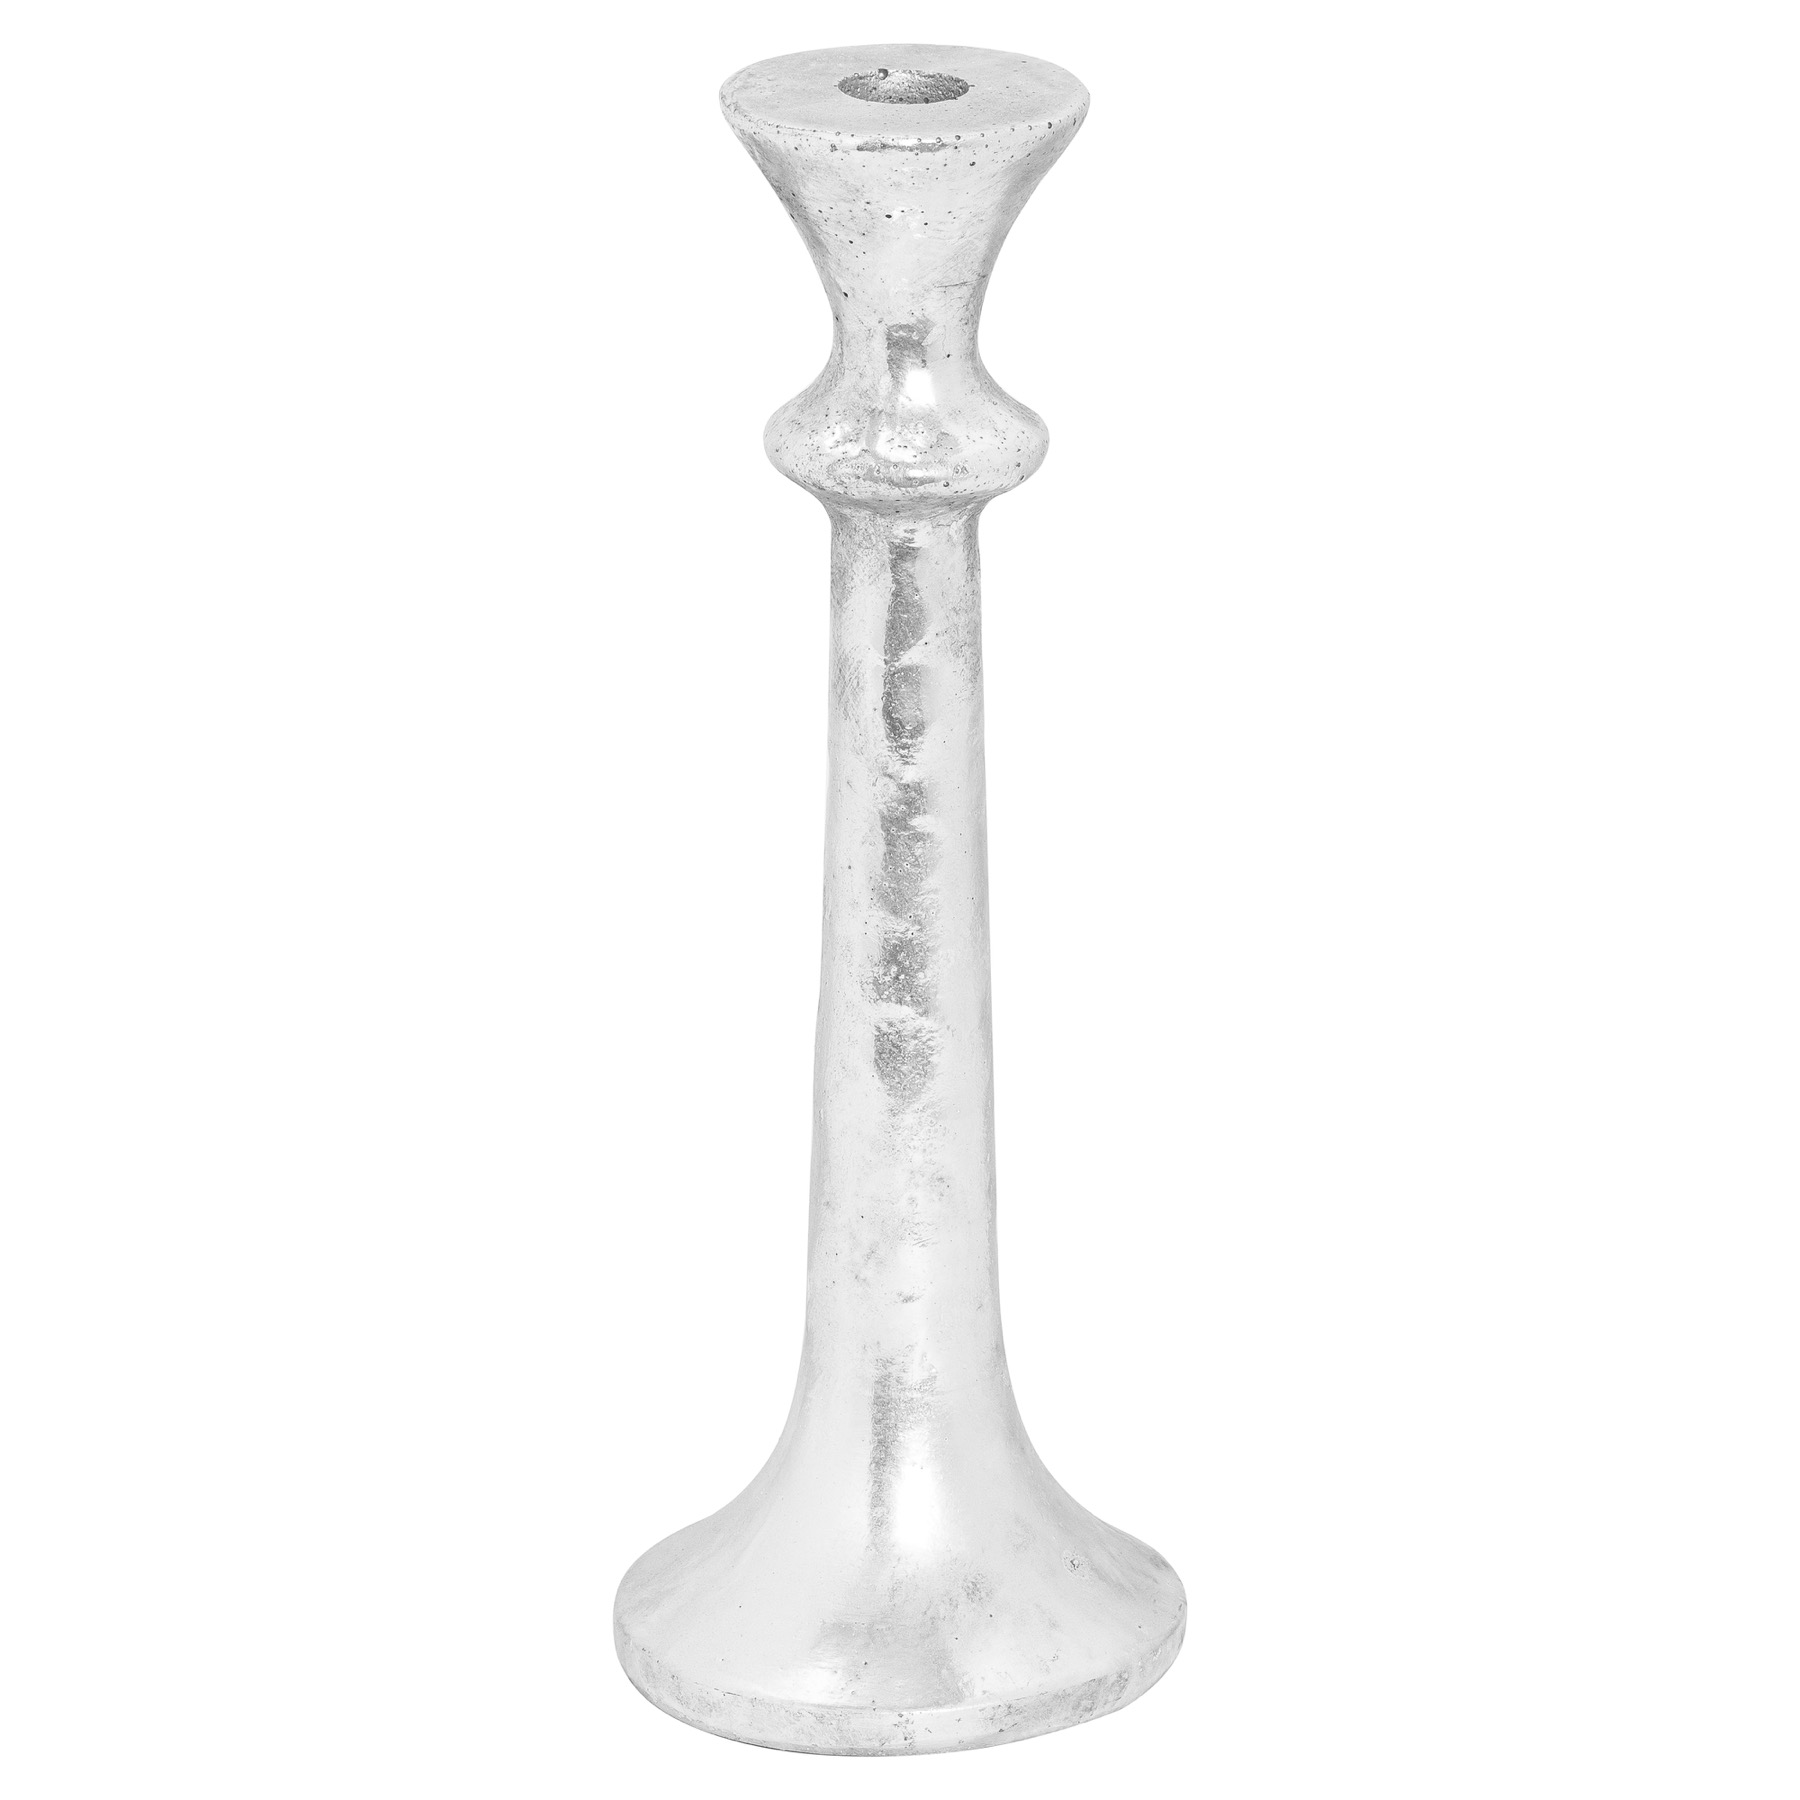 Silver Ceramic Collared Candle Holder - Image 1